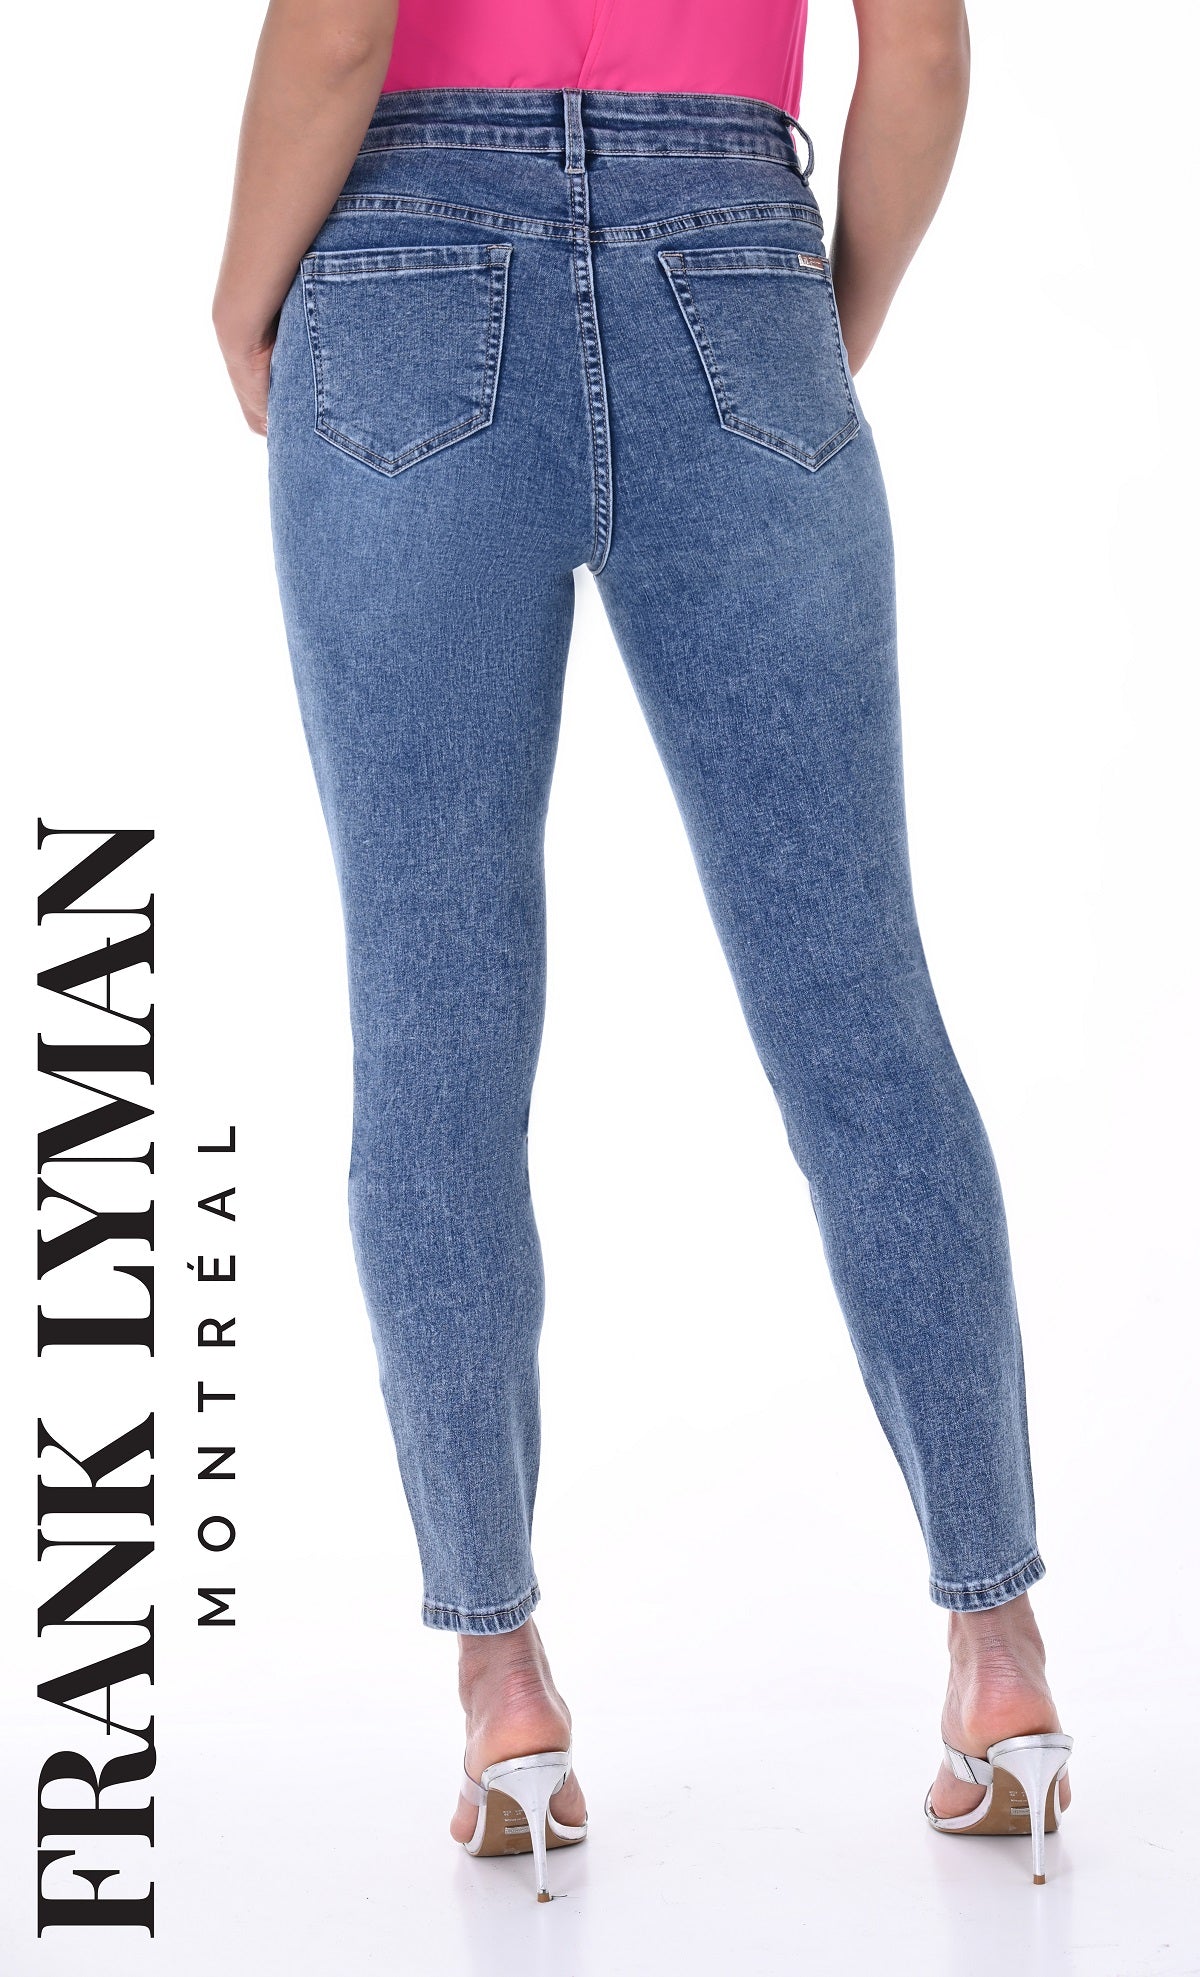 Frank Lyman Montreal Denim Blue Jeans With Sequin Milan Print Detail On Front